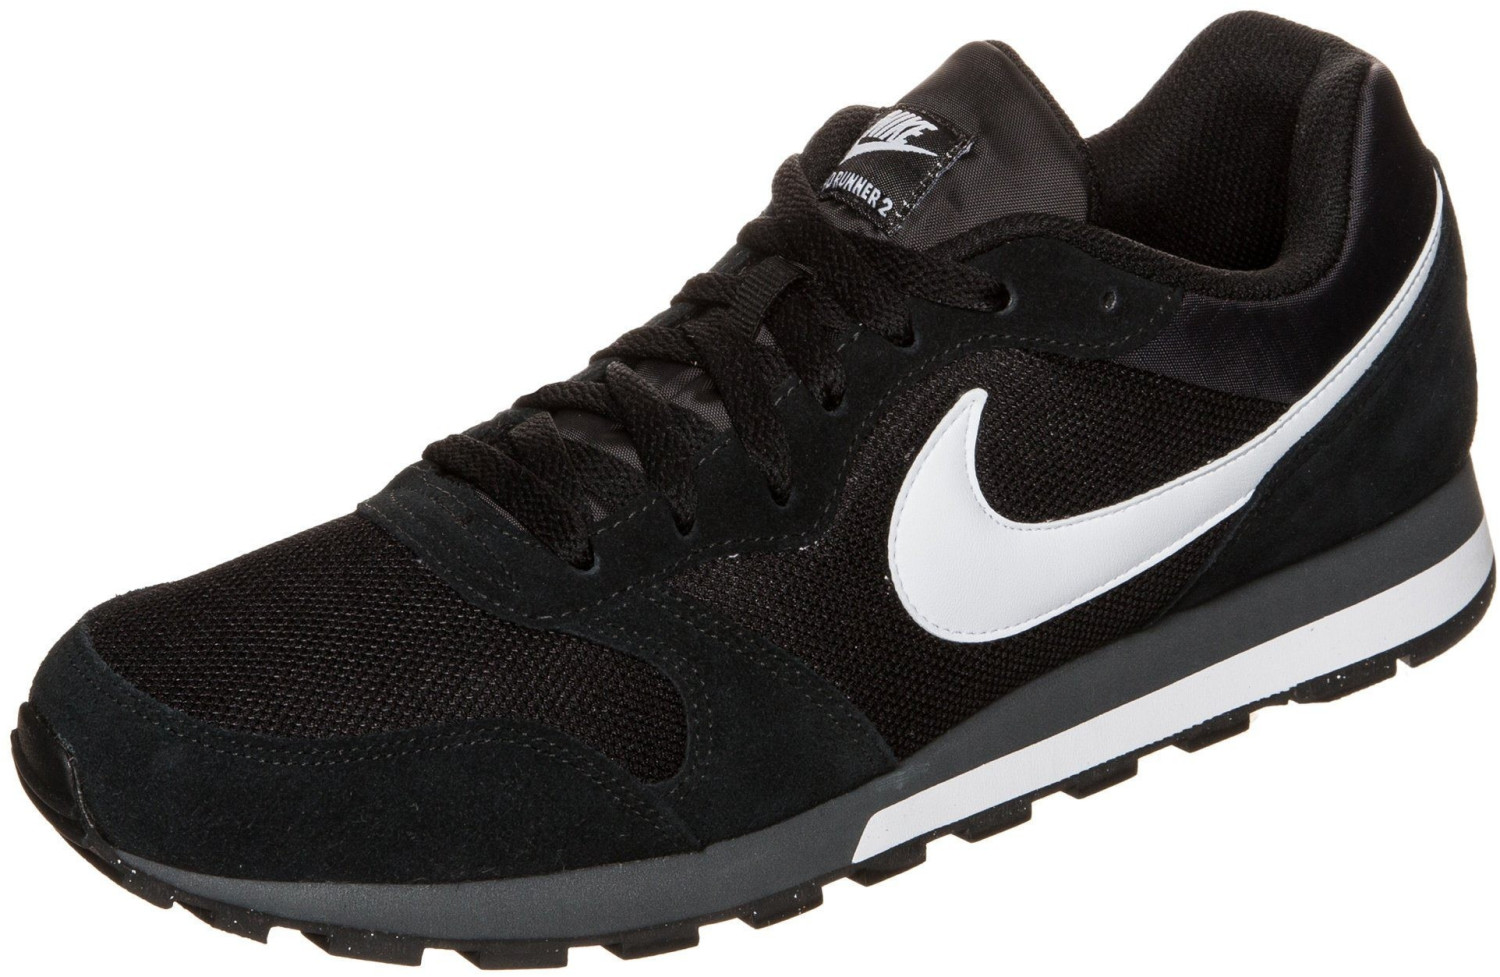 Buy Nike MD Runner 2 Suede black/white (749794-010) from £54.99 (Today ...